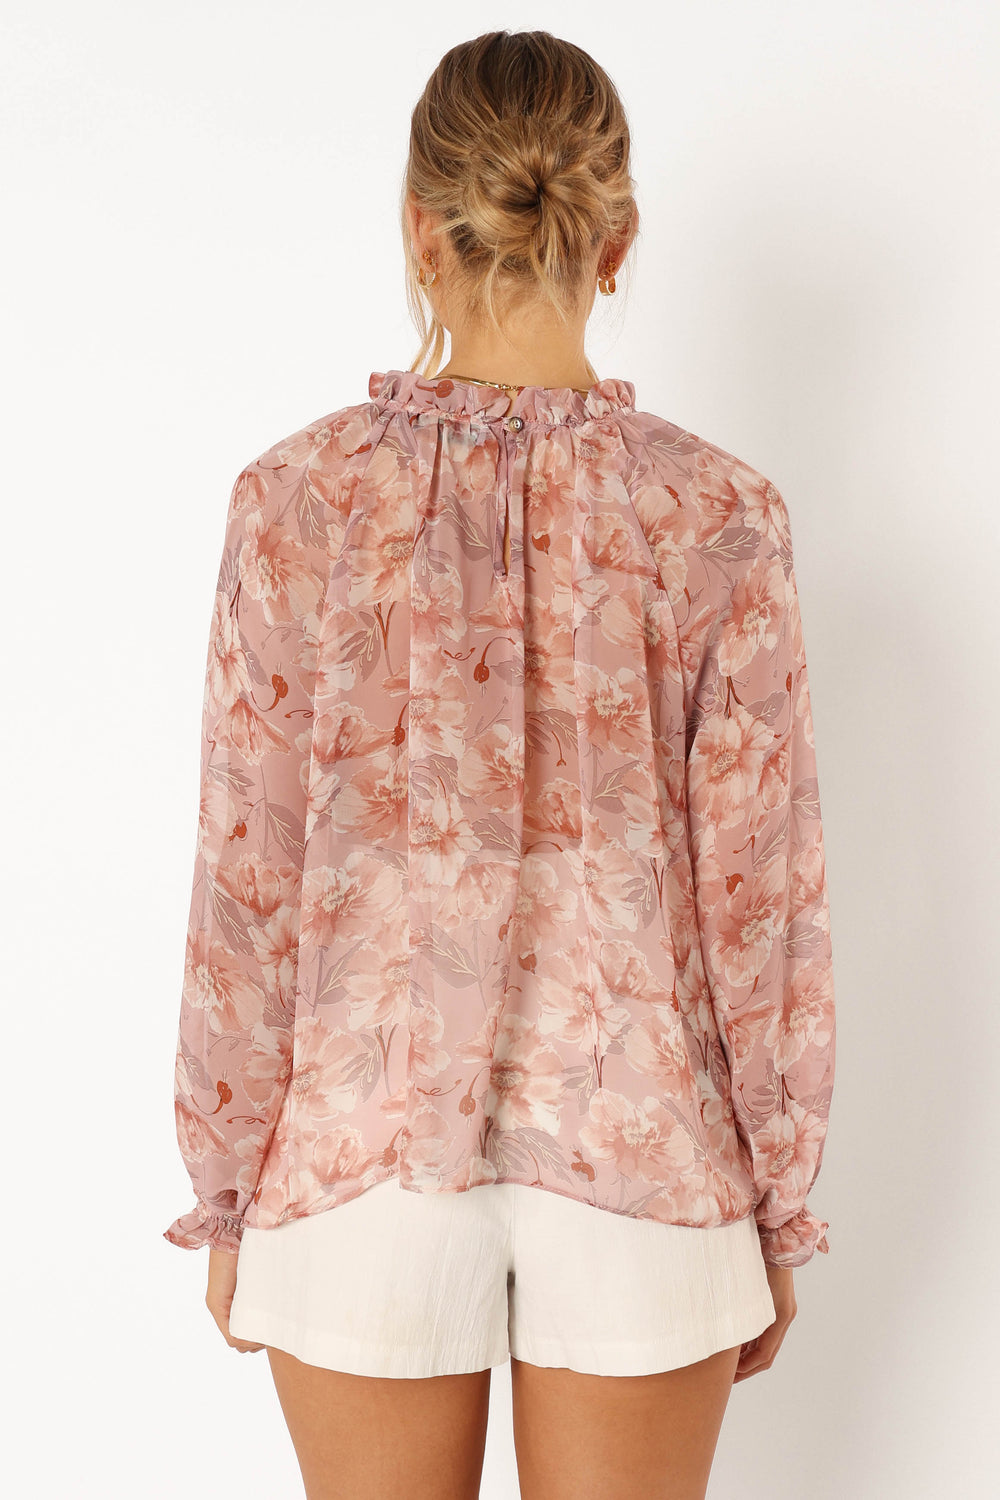 Petal and Pup USA TOPS Foster Blouse - Floral